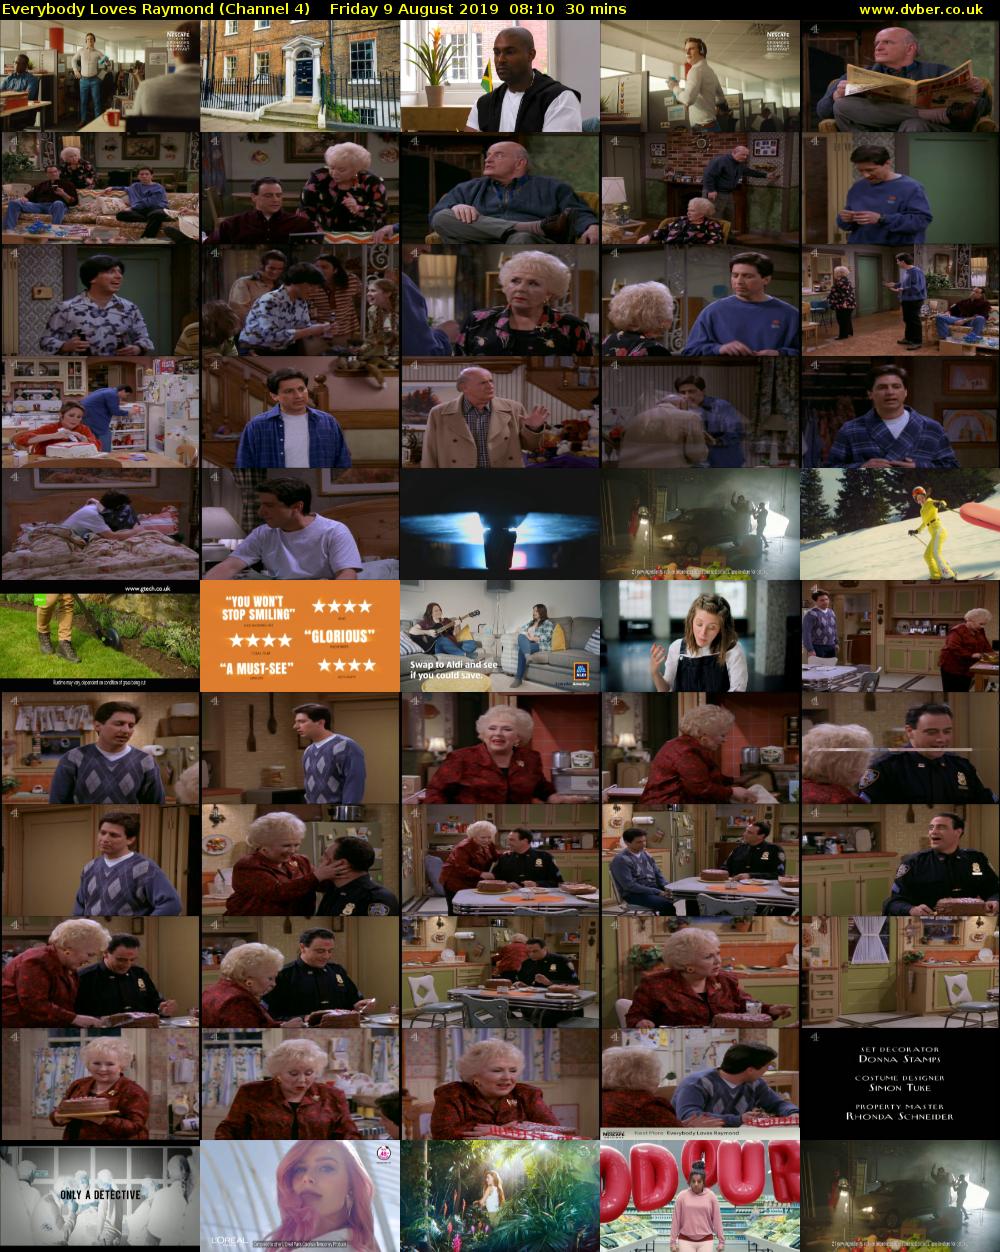 Everybody Loves Raymond (Channel 4) Friday 9 August 2019 08:10 - 08:40